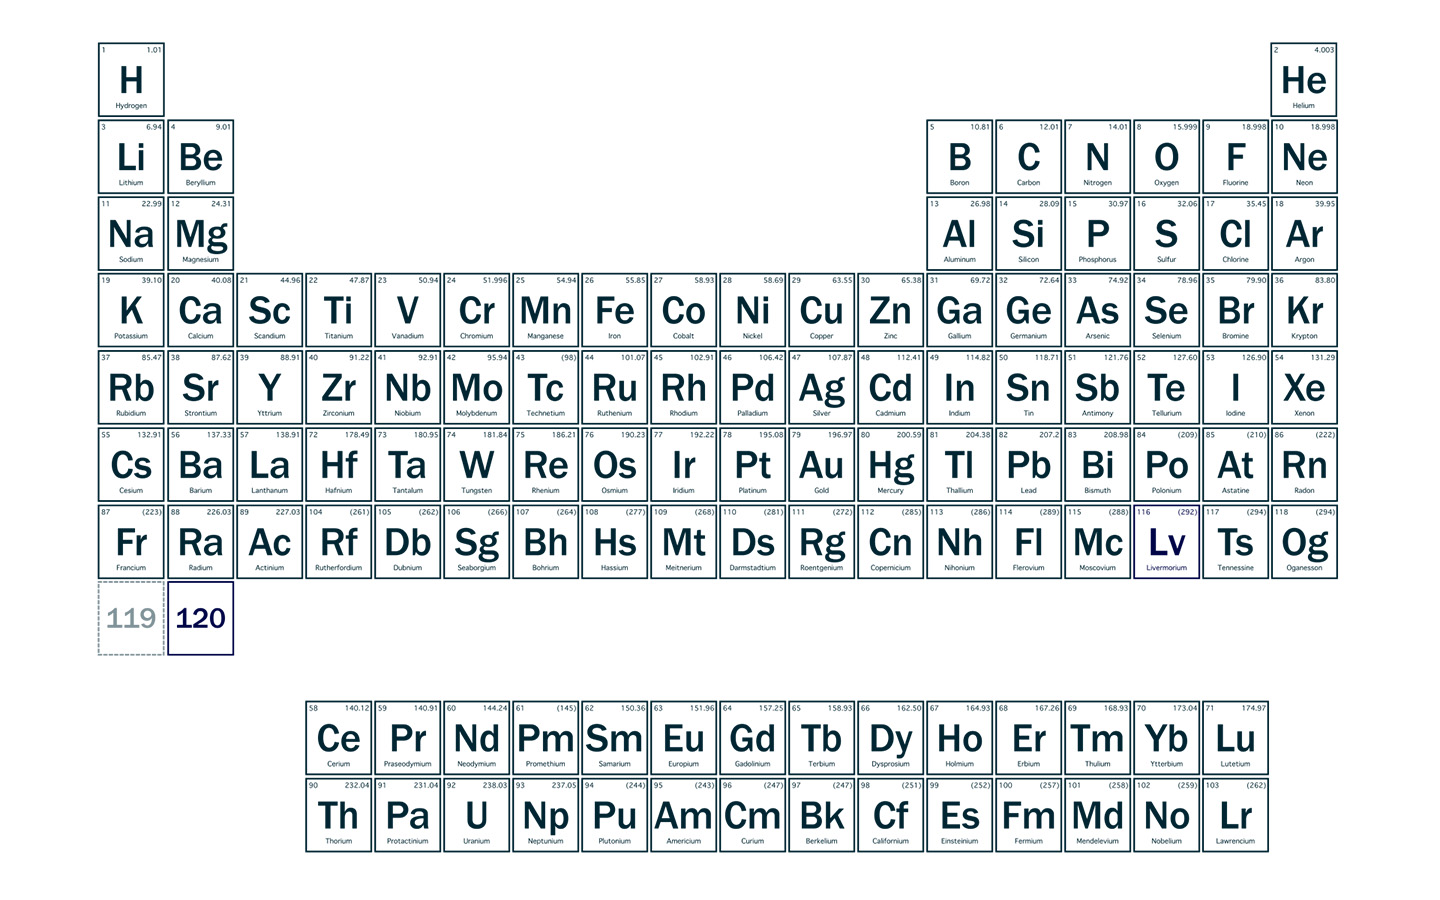 An expanded periodic table shows where researchers expect elements 119 and 120 to be categorized if they are discovered.